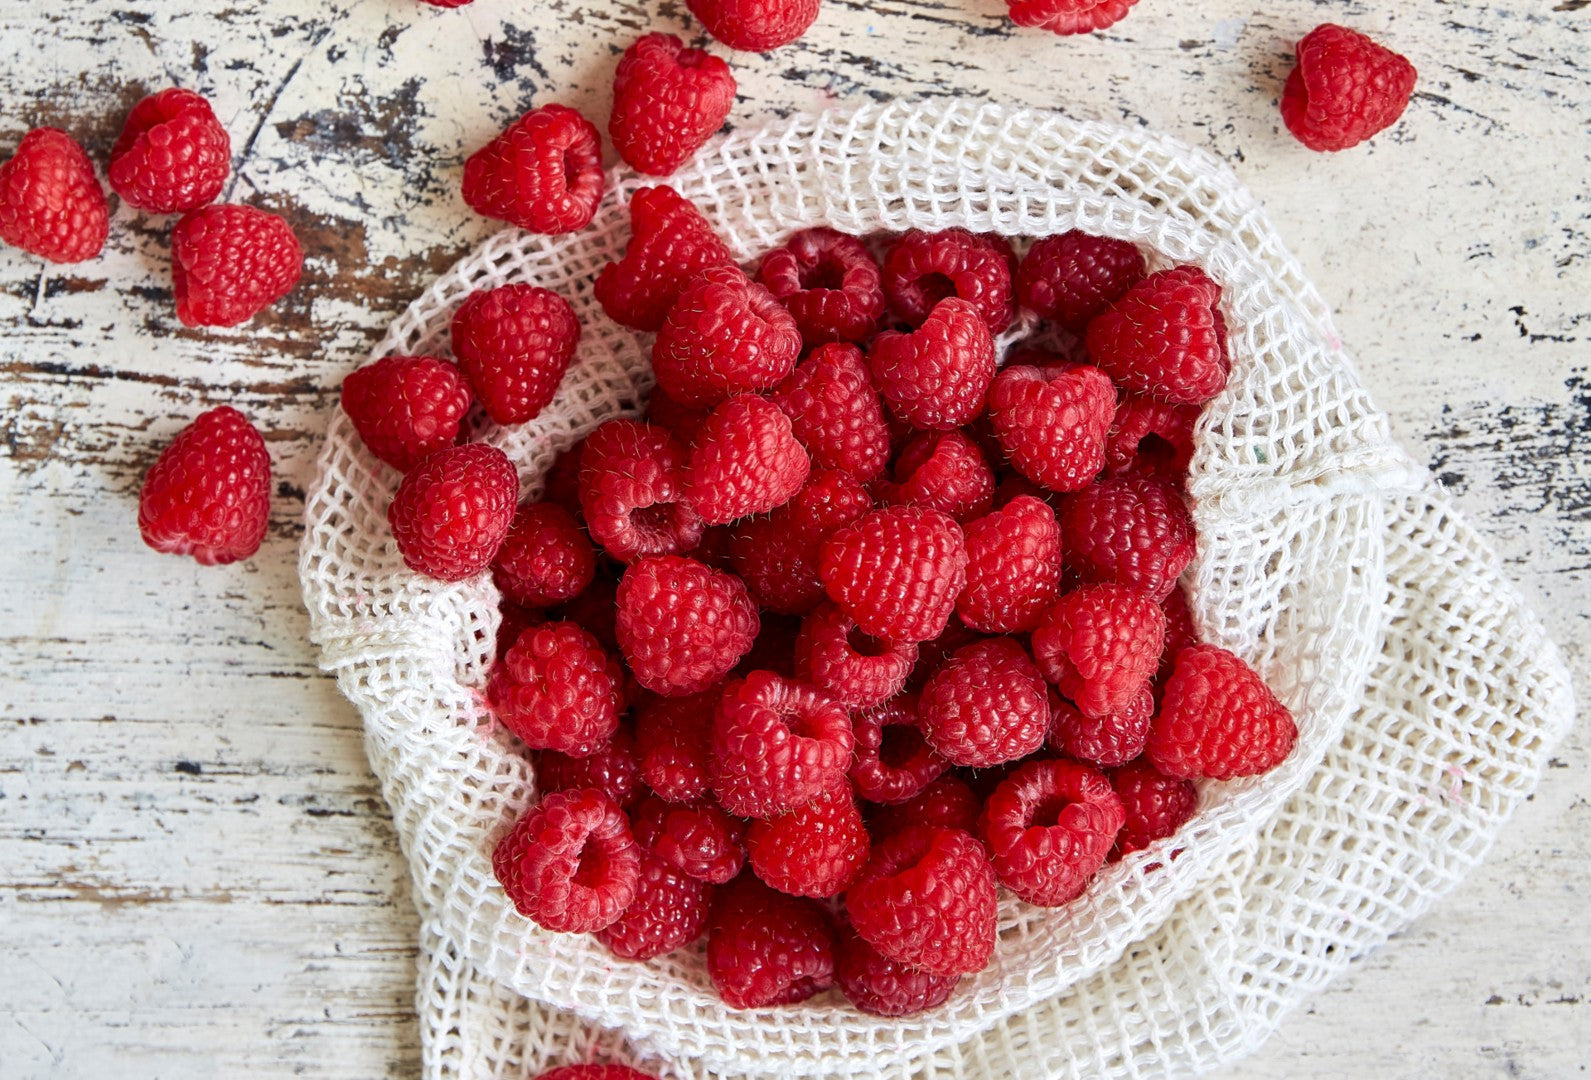 A white net bag of raspberries on a worn white wooden table